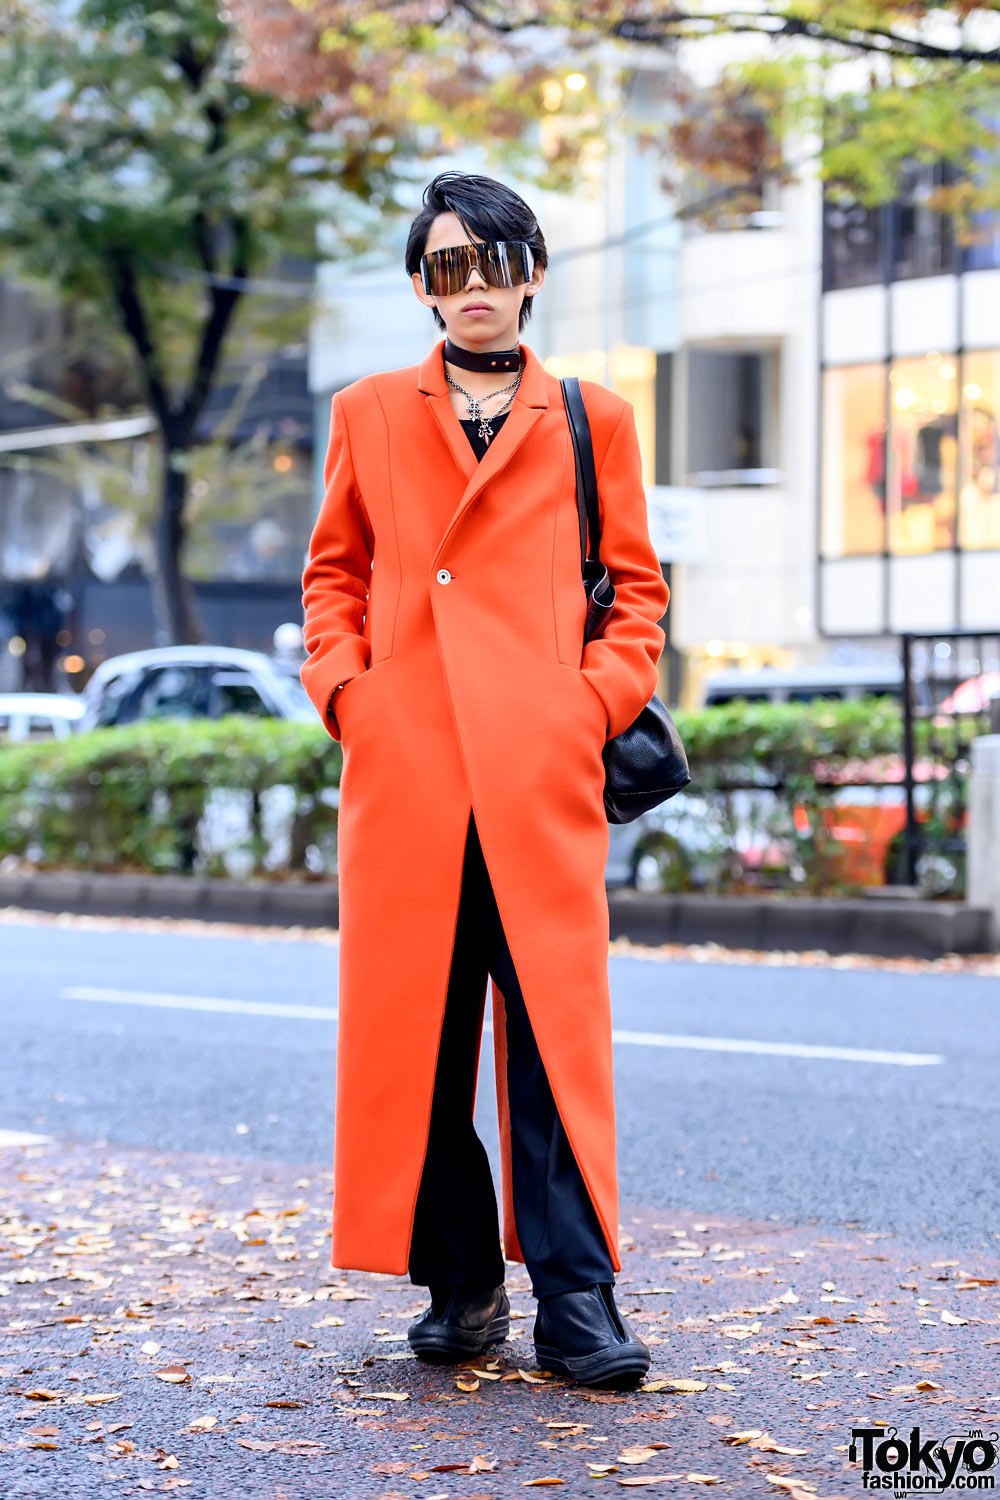 Asymmetrical Maxi Coat Street Style in Tokyo w/ S.A.W. Coat, Rick Owens Sunglasses & Human Experiments Necklace